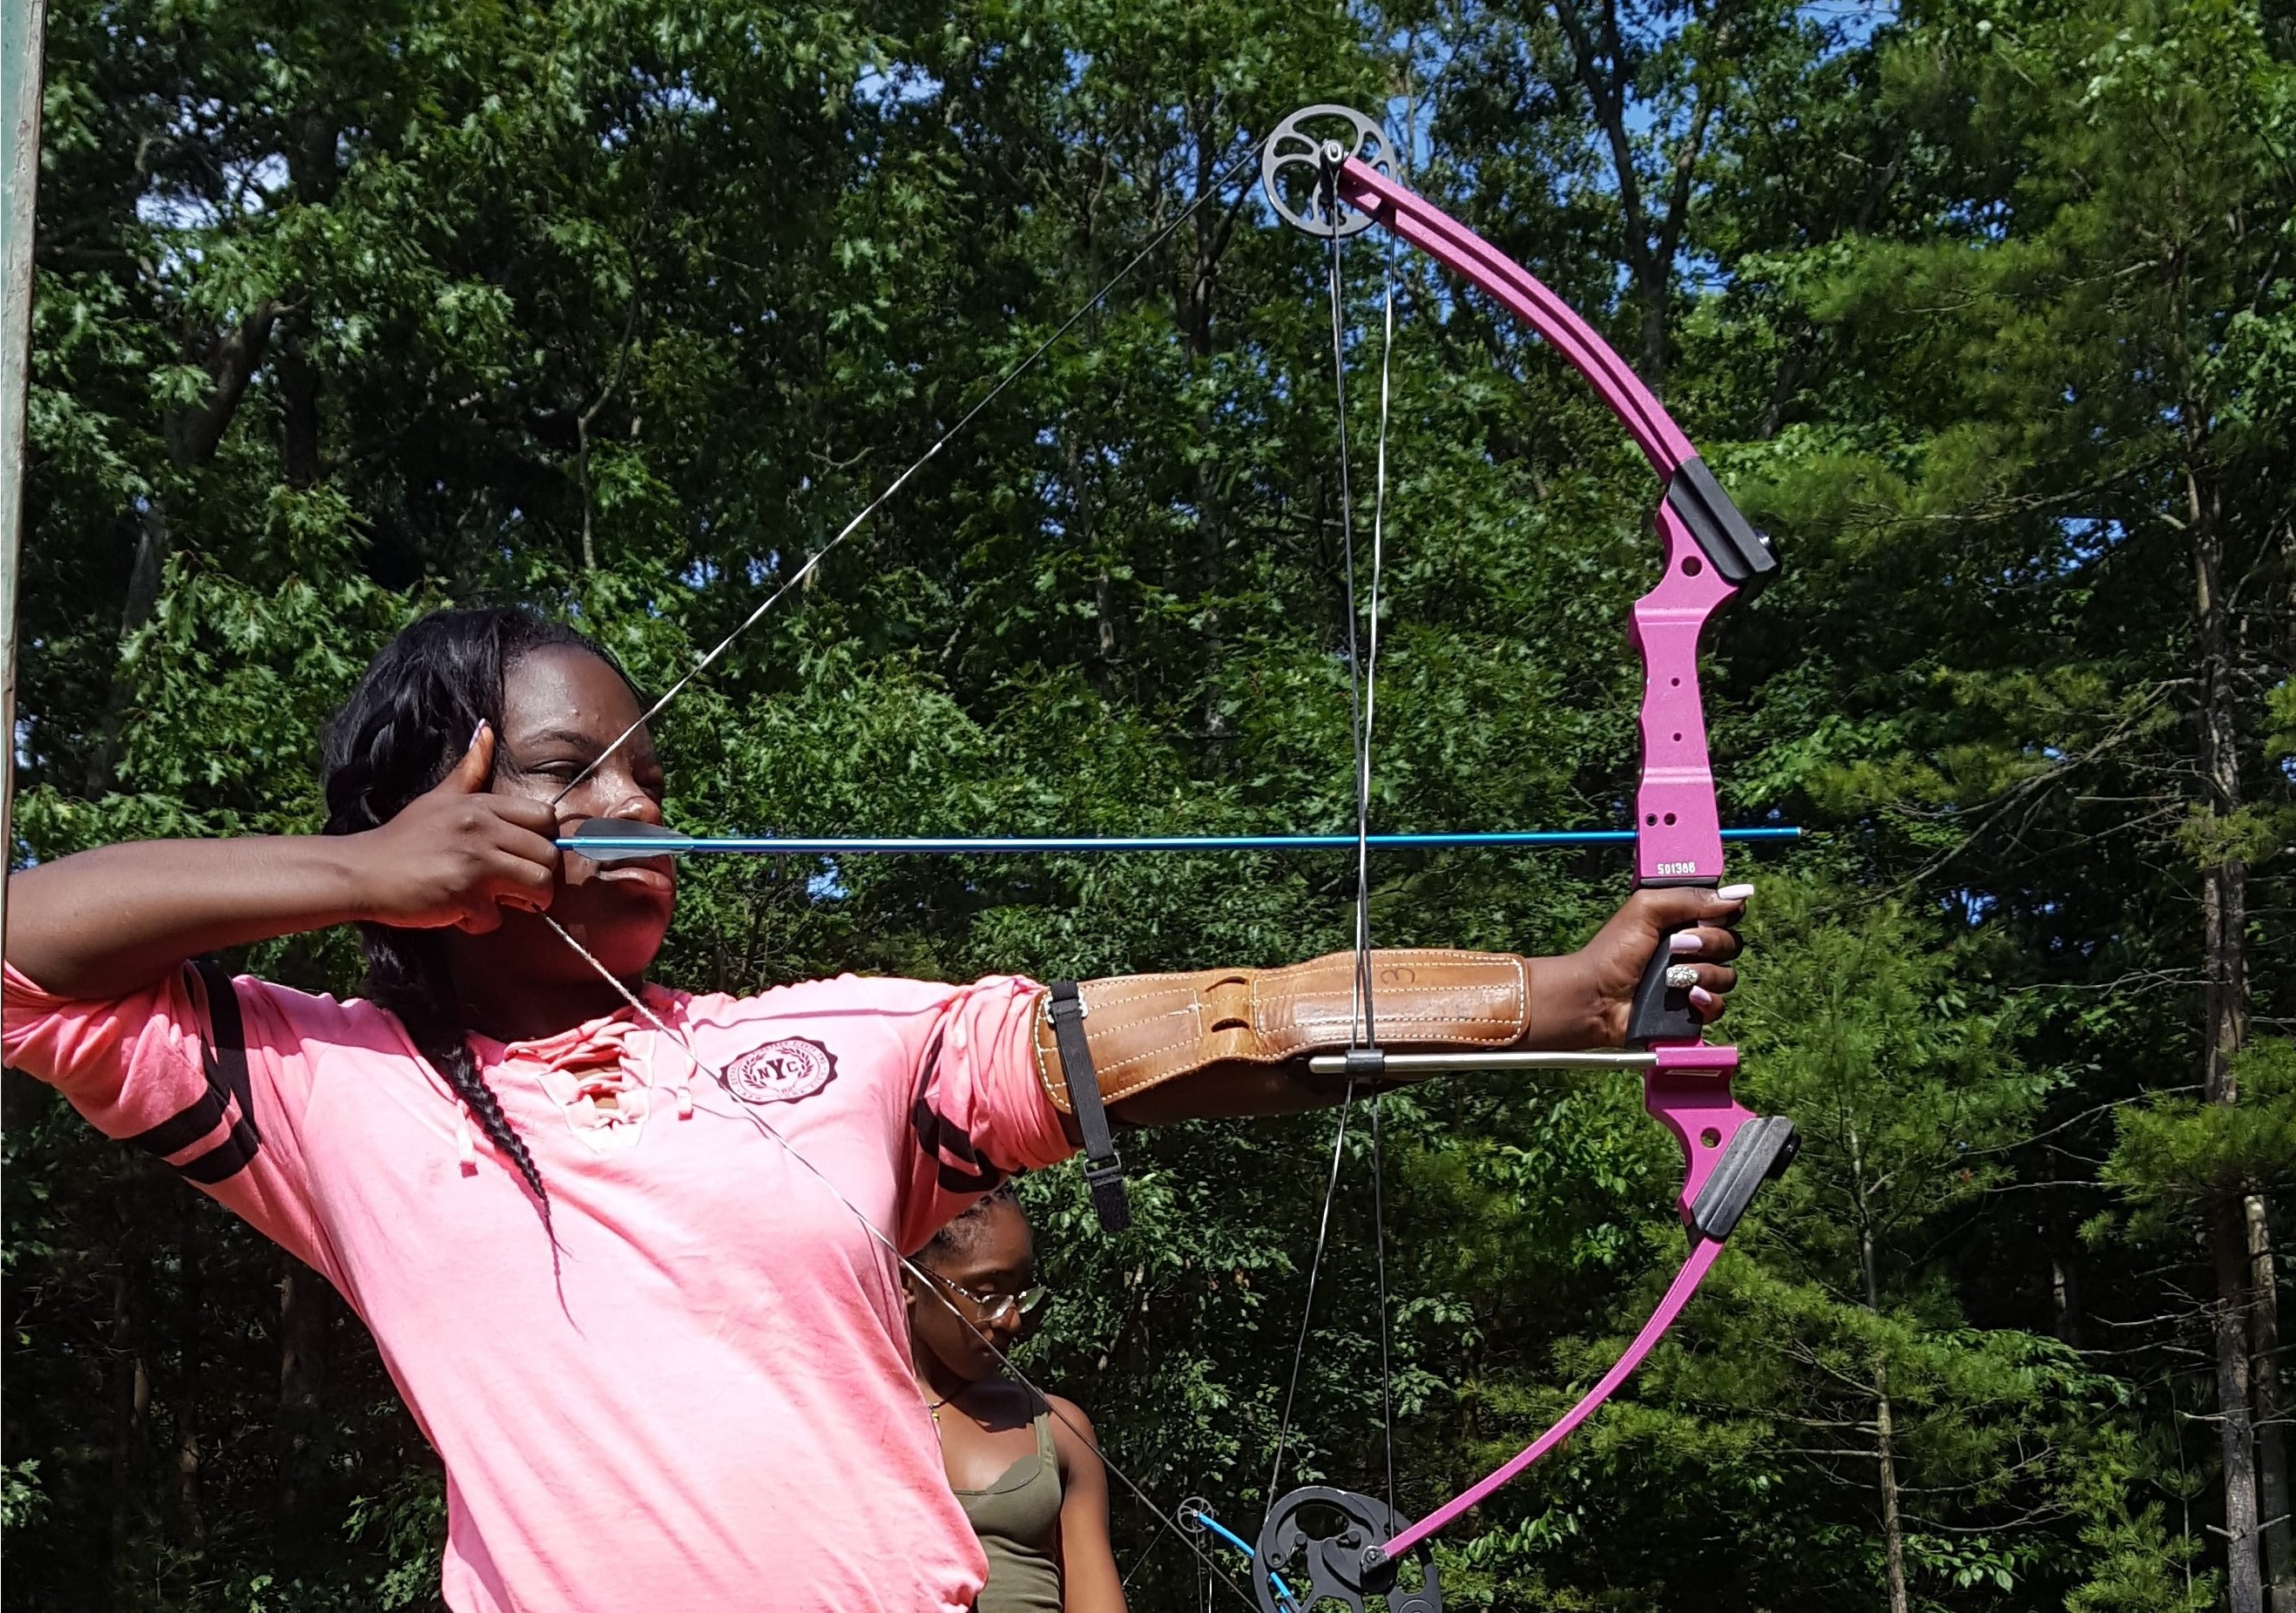 Gabrielle Struthers joins other Detroit ICO participants in an archery competition.